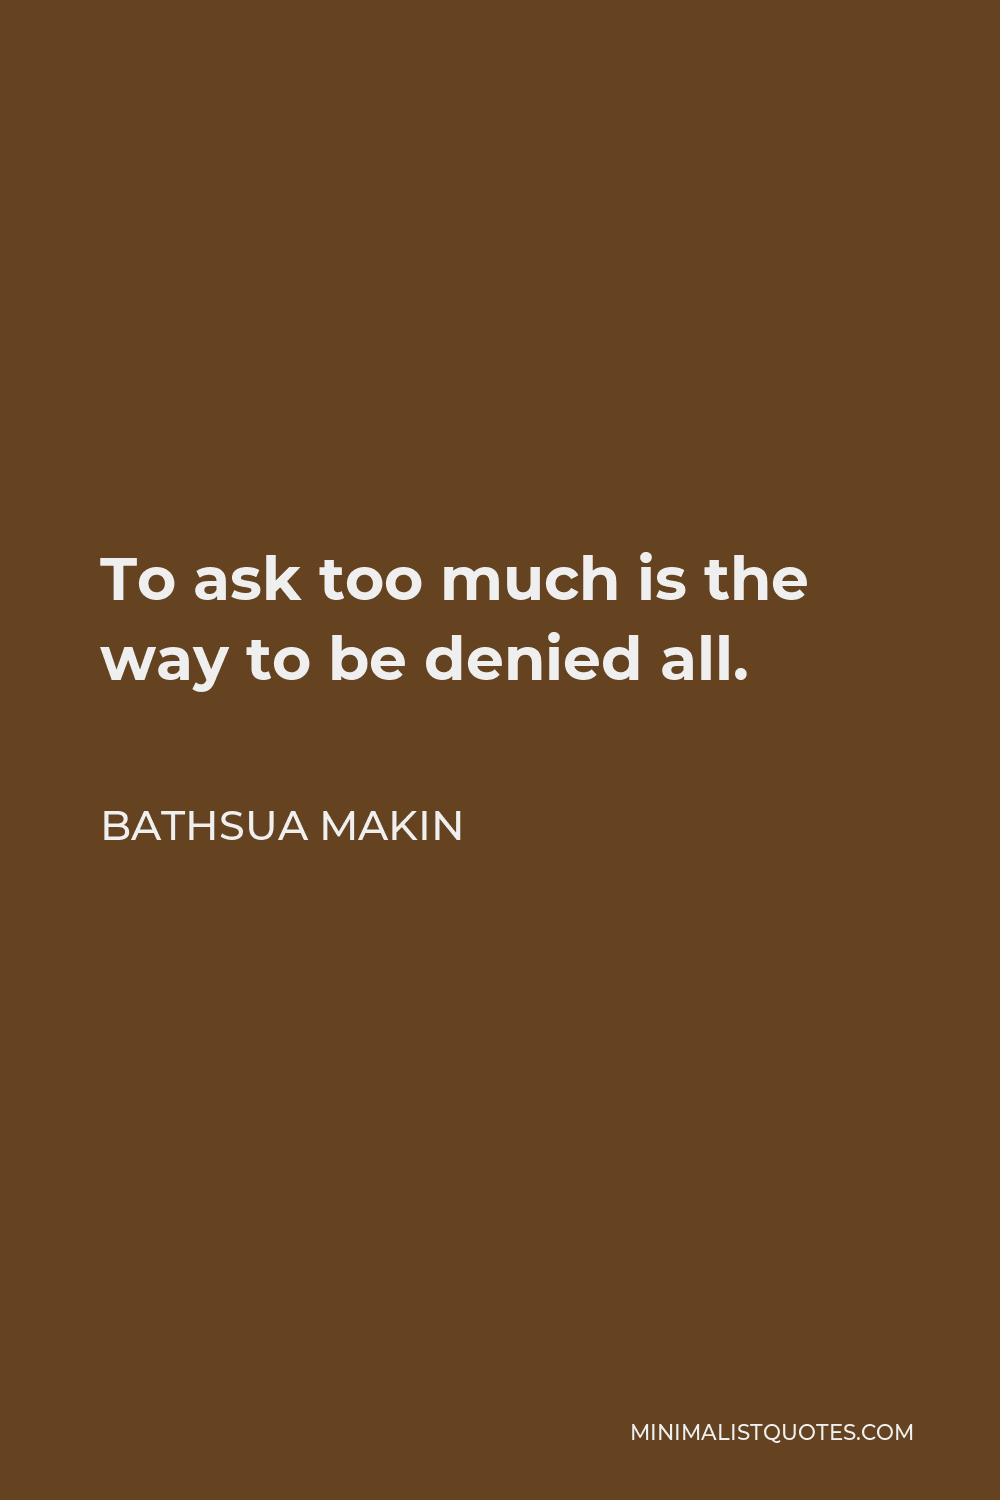 Bathsua Makin Quote - To ask too much is the way to be denied all.